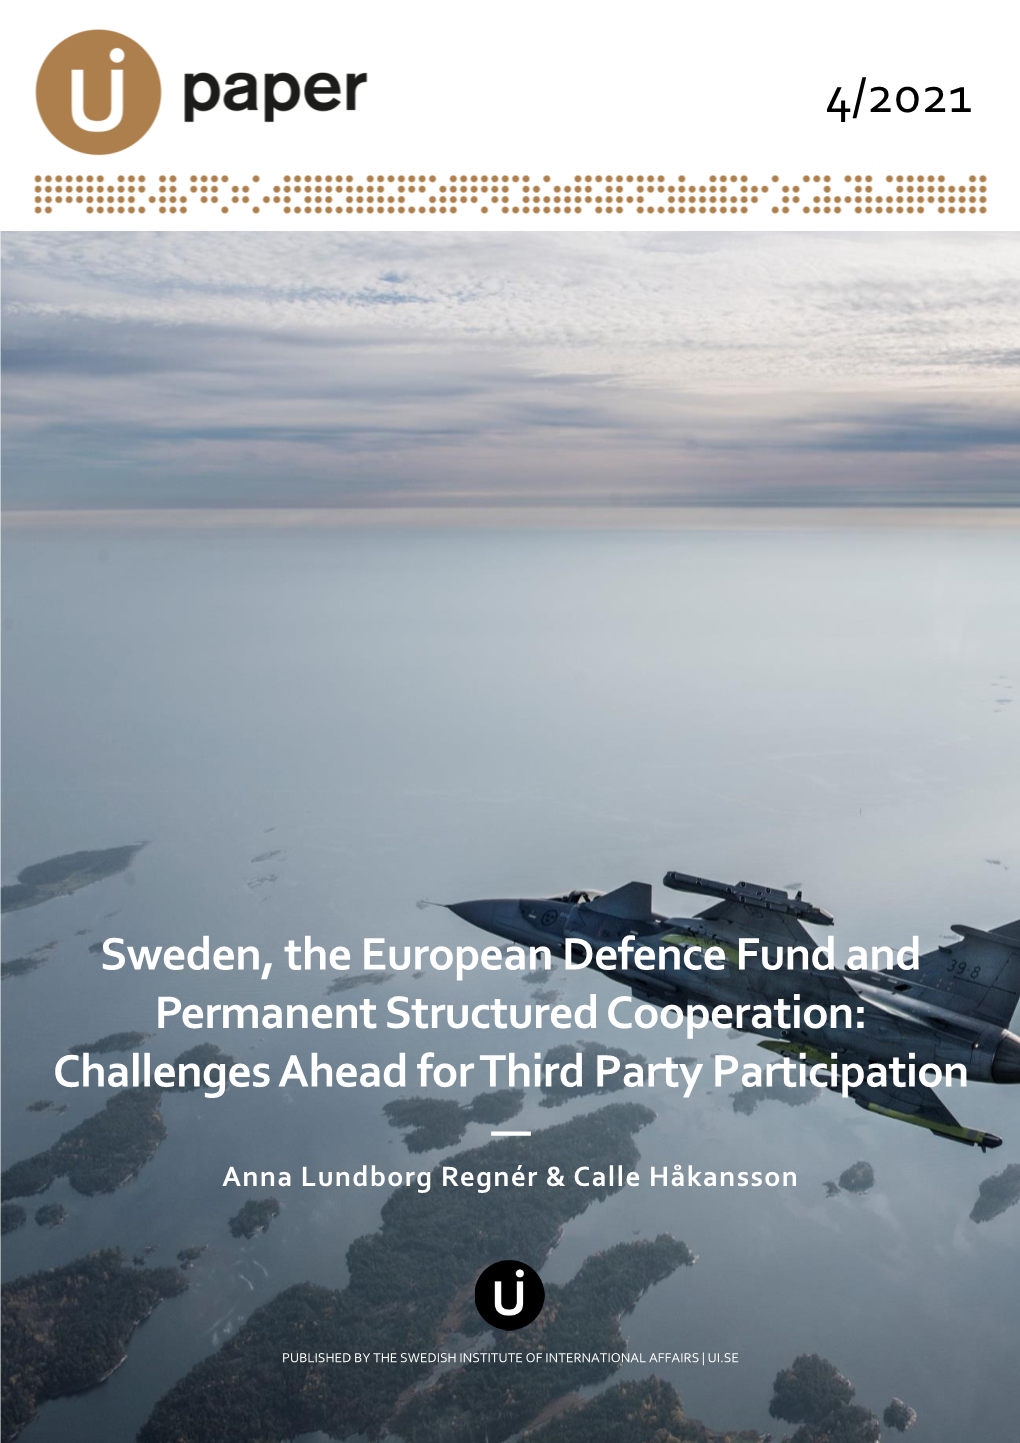 Sweden, the European Defence Fund and Permanent Structured Cooperation: Challenges Ahead for Third Party Participation — Anna Lundborg Regnér & Calle Håkansson